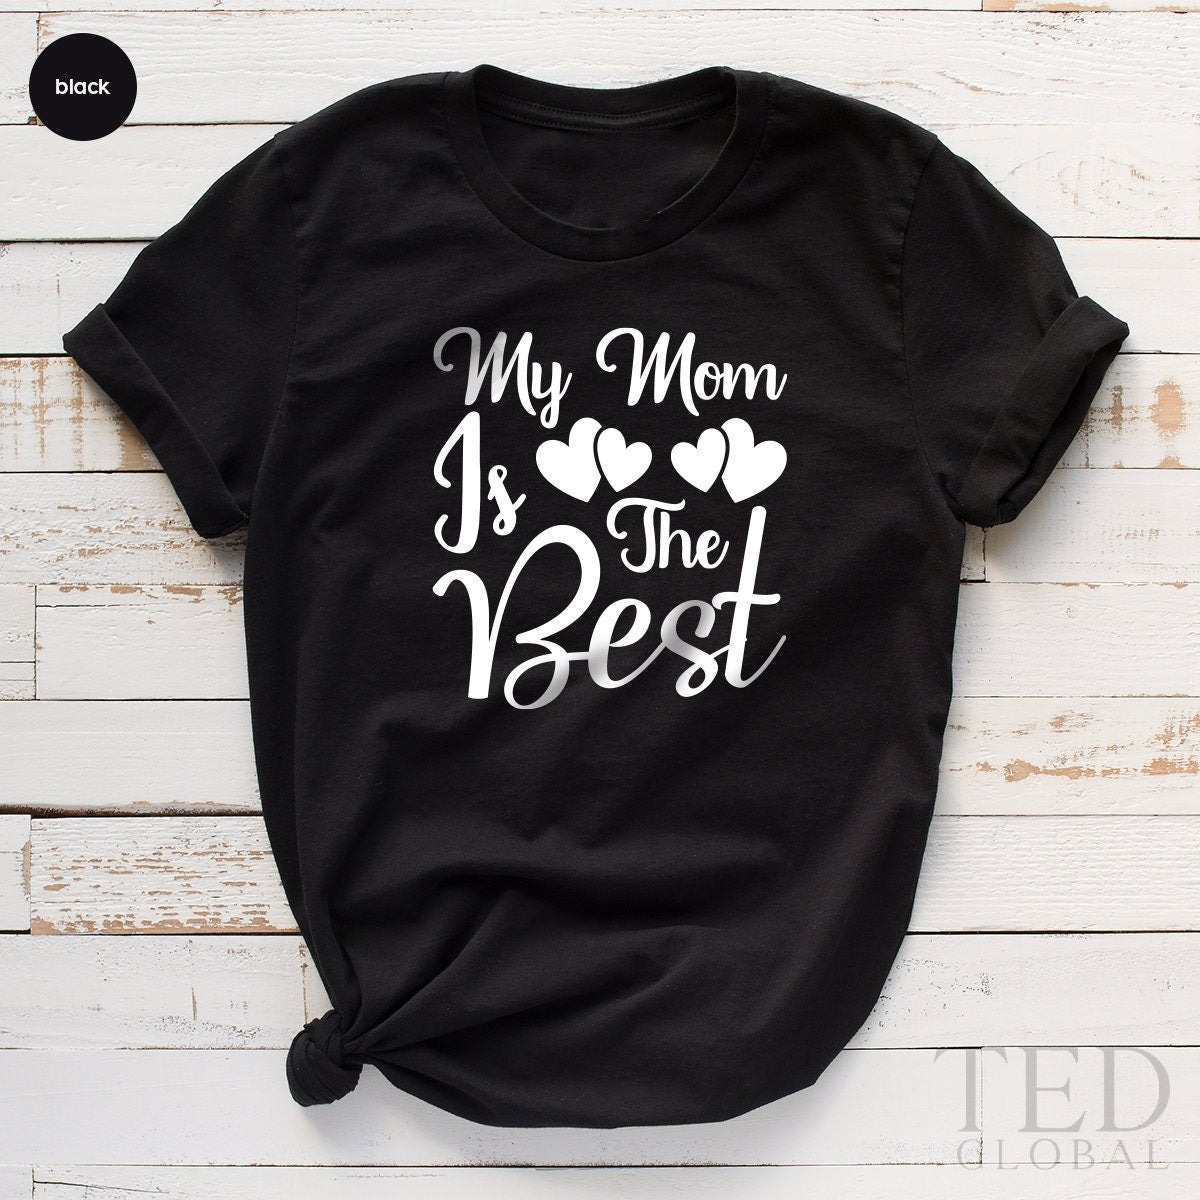 Best Mom TShirt, Mama T Shirt, Mommy T-Shirt, Cute Mom Shirt, Mothers Day Tee, Gift For Mama, My Mom IS The Best Shirts, Mama Birthday Gift - Fastdeliverytees.com